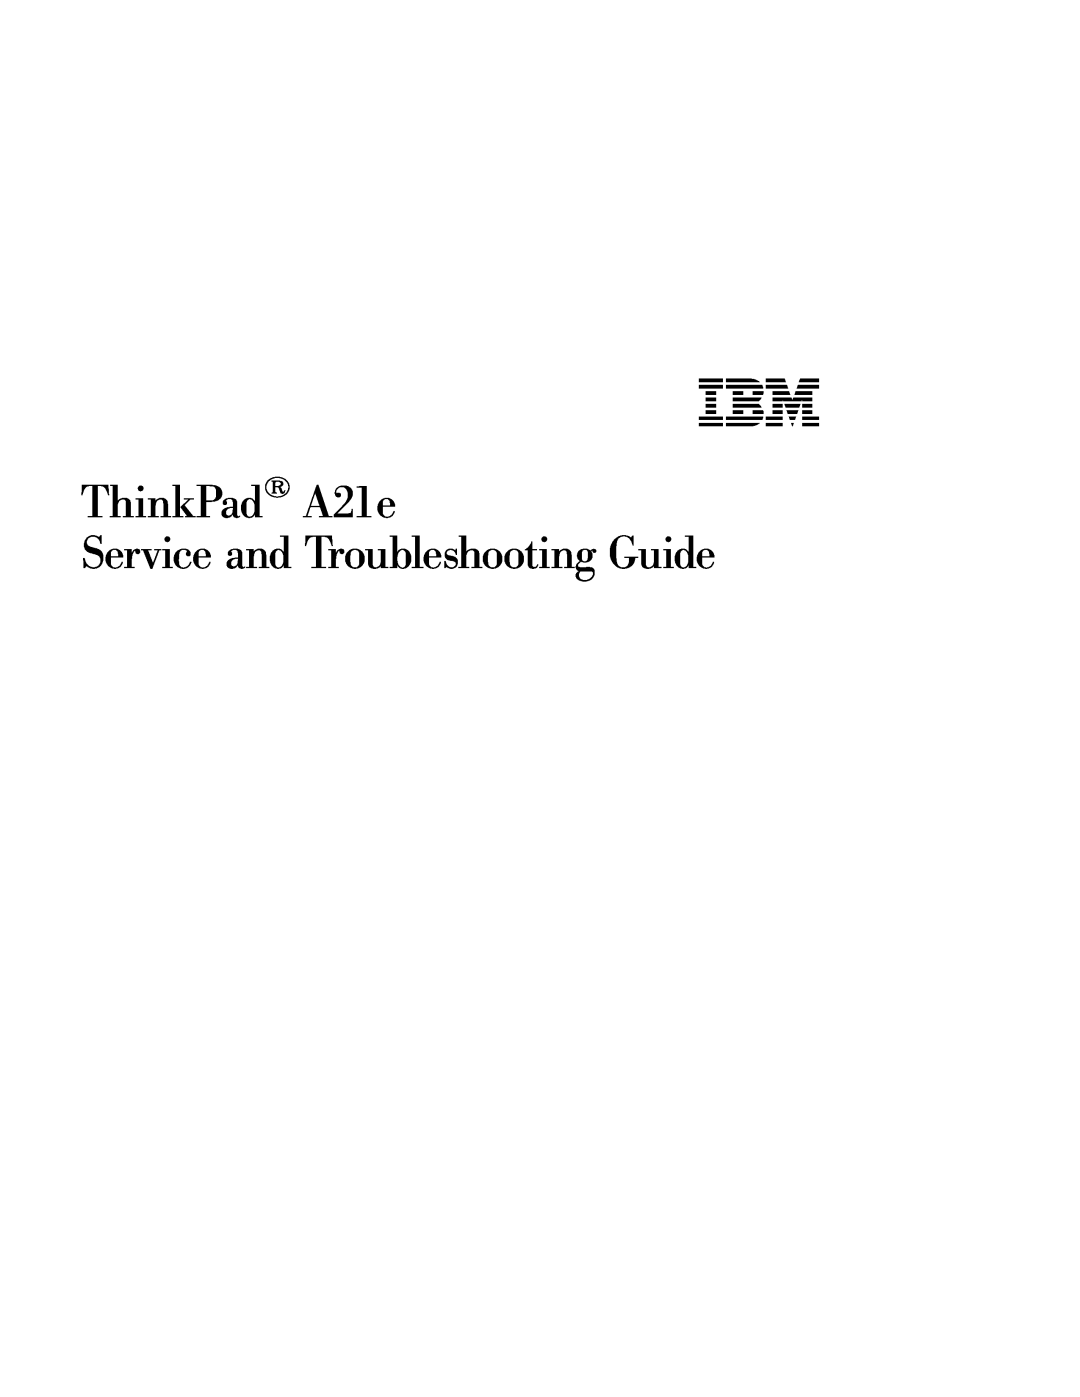 IBM manual ThinkPad A21e Service and Troubleshooting Guide 